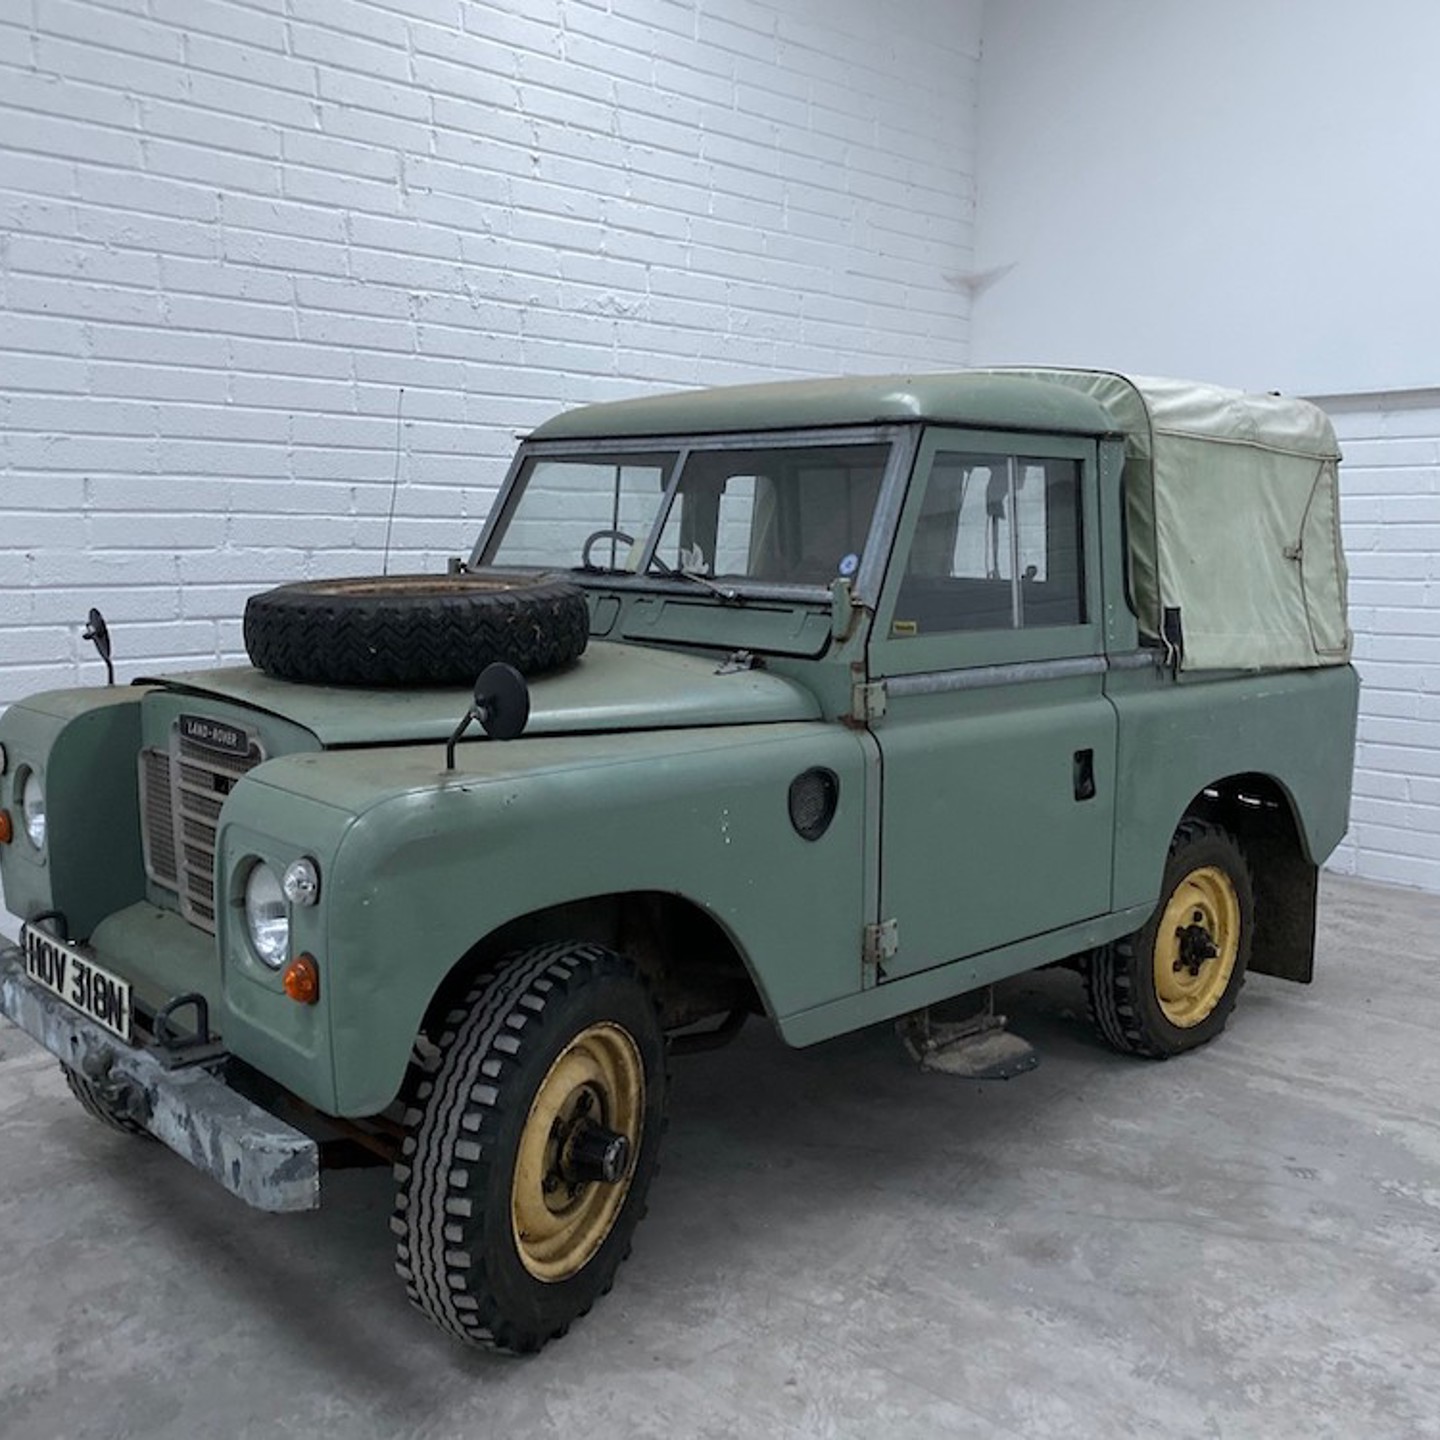 1975 Landrover Series III Sold For £9184